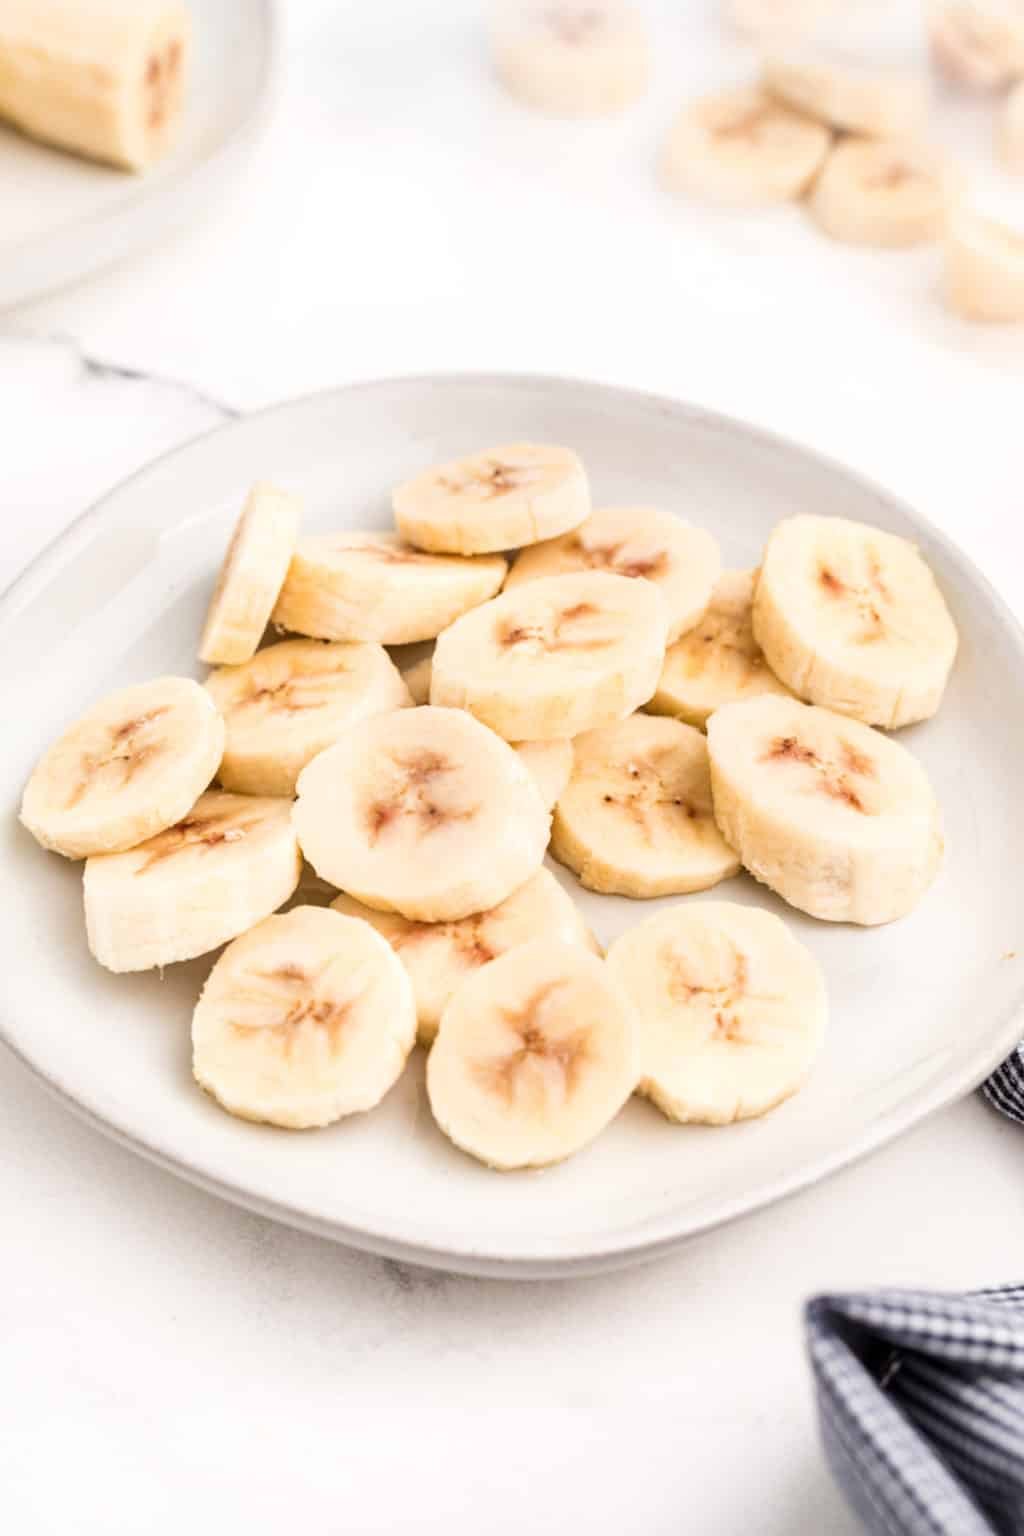 How to Freeze Bananas for Smoothies (Halved or Sliced)